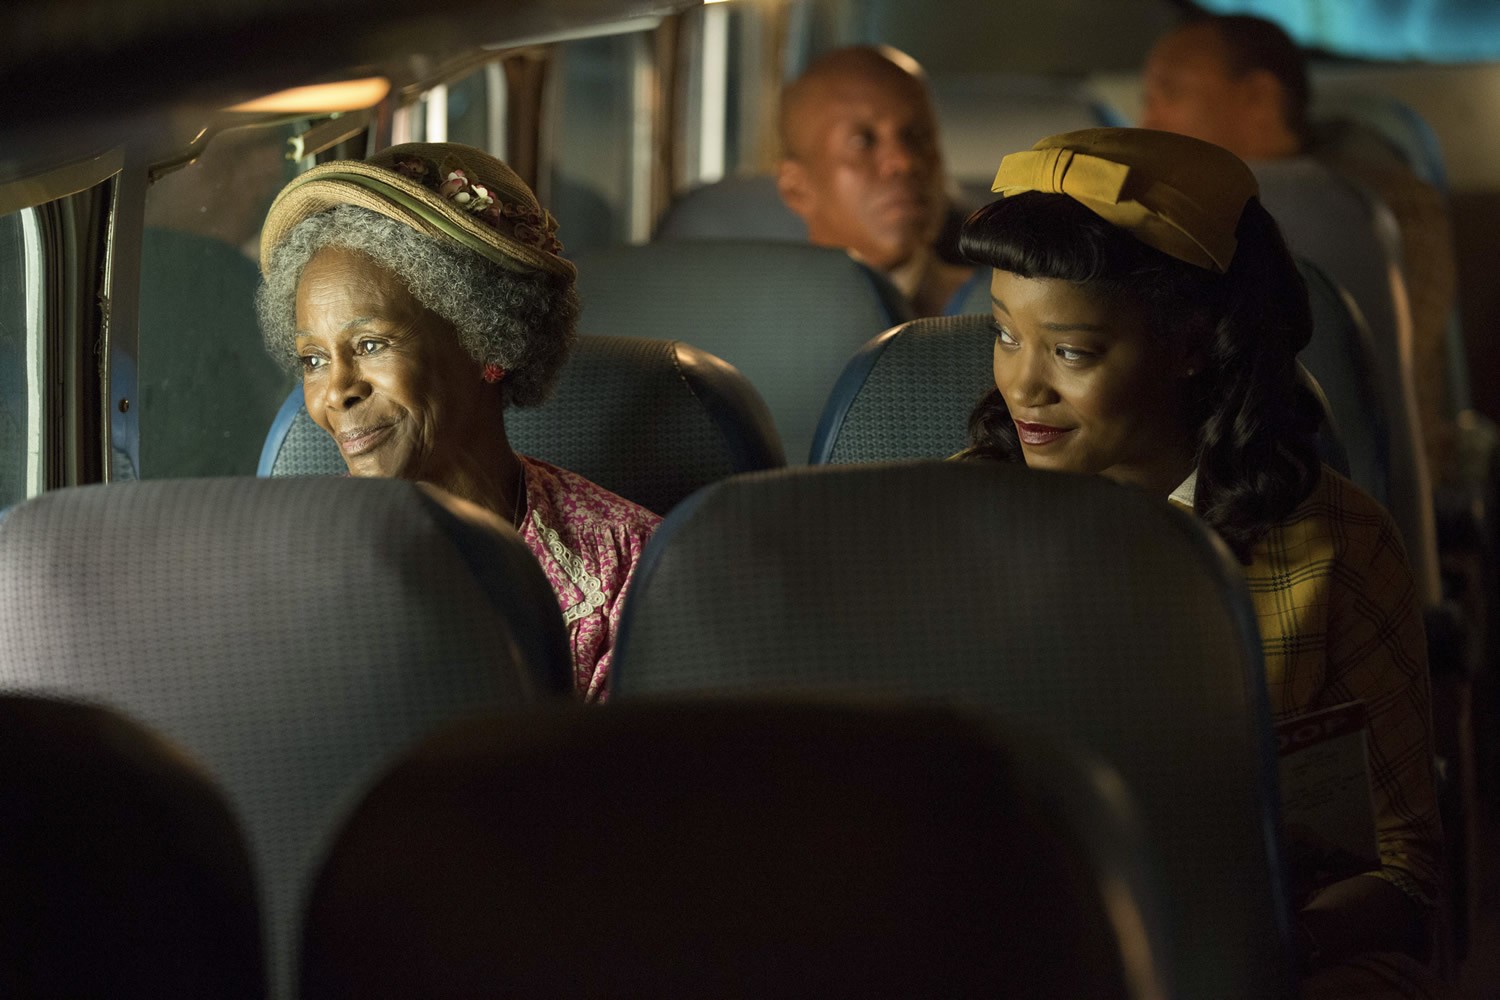 Cicely Tyson stars as Mrs. Watts and Keke Palmer stars as Thelma in Lifetime's The Trip to Bountiful (2014). Photo credit by Bob Mahoney.